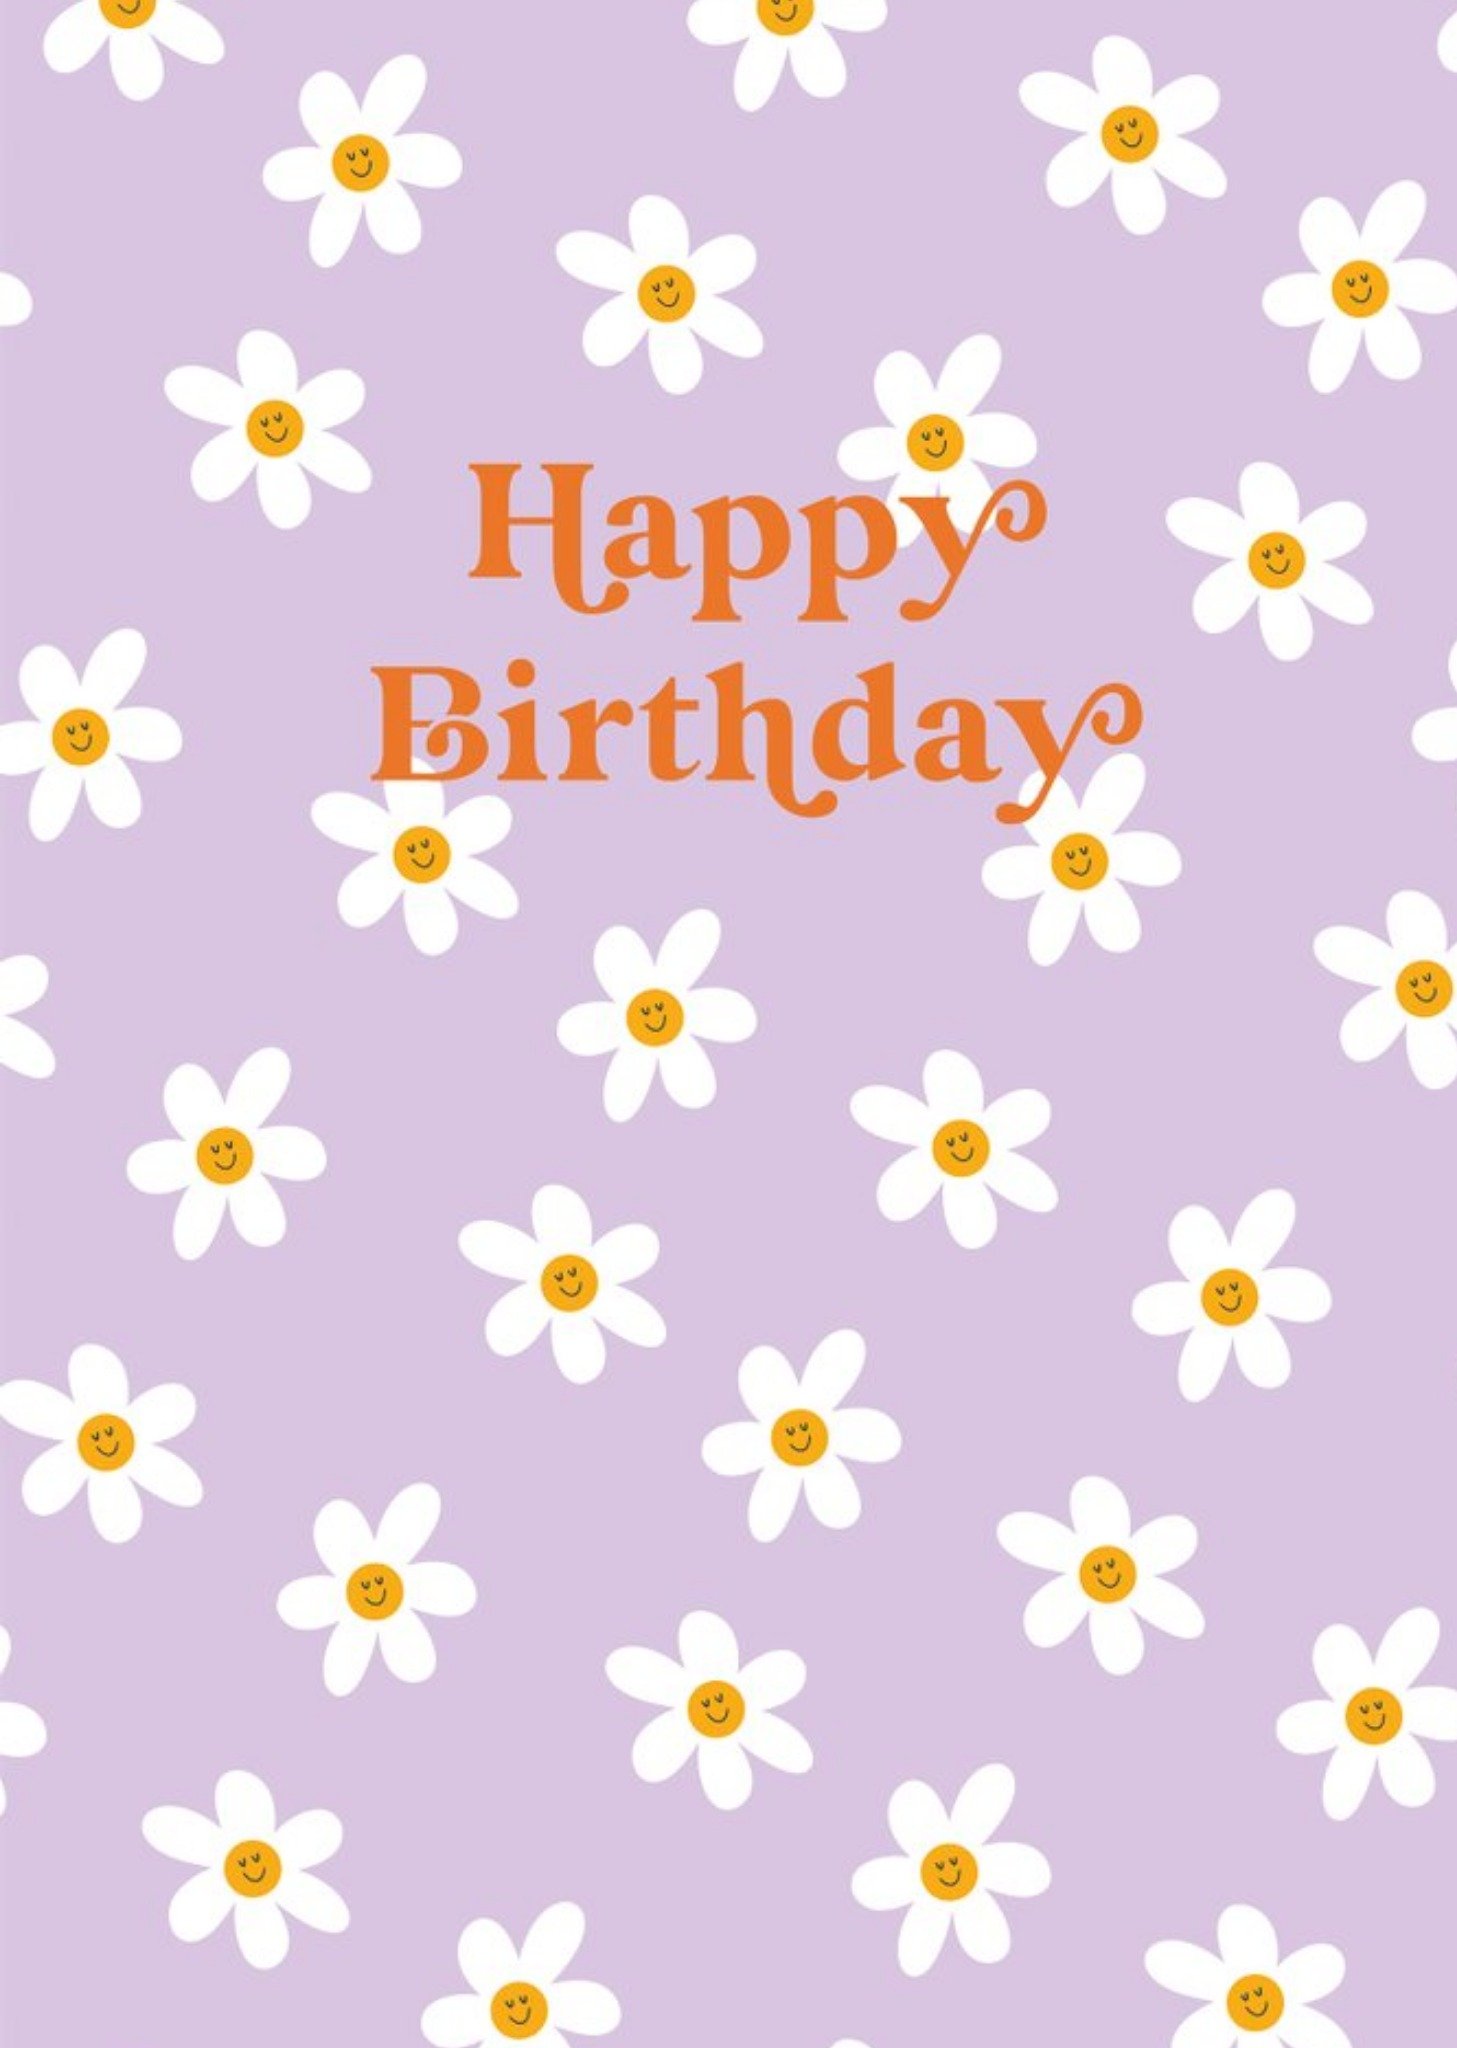 Moonpig Retro Typography On A Daisy Pattern Background Birthday Card, Large